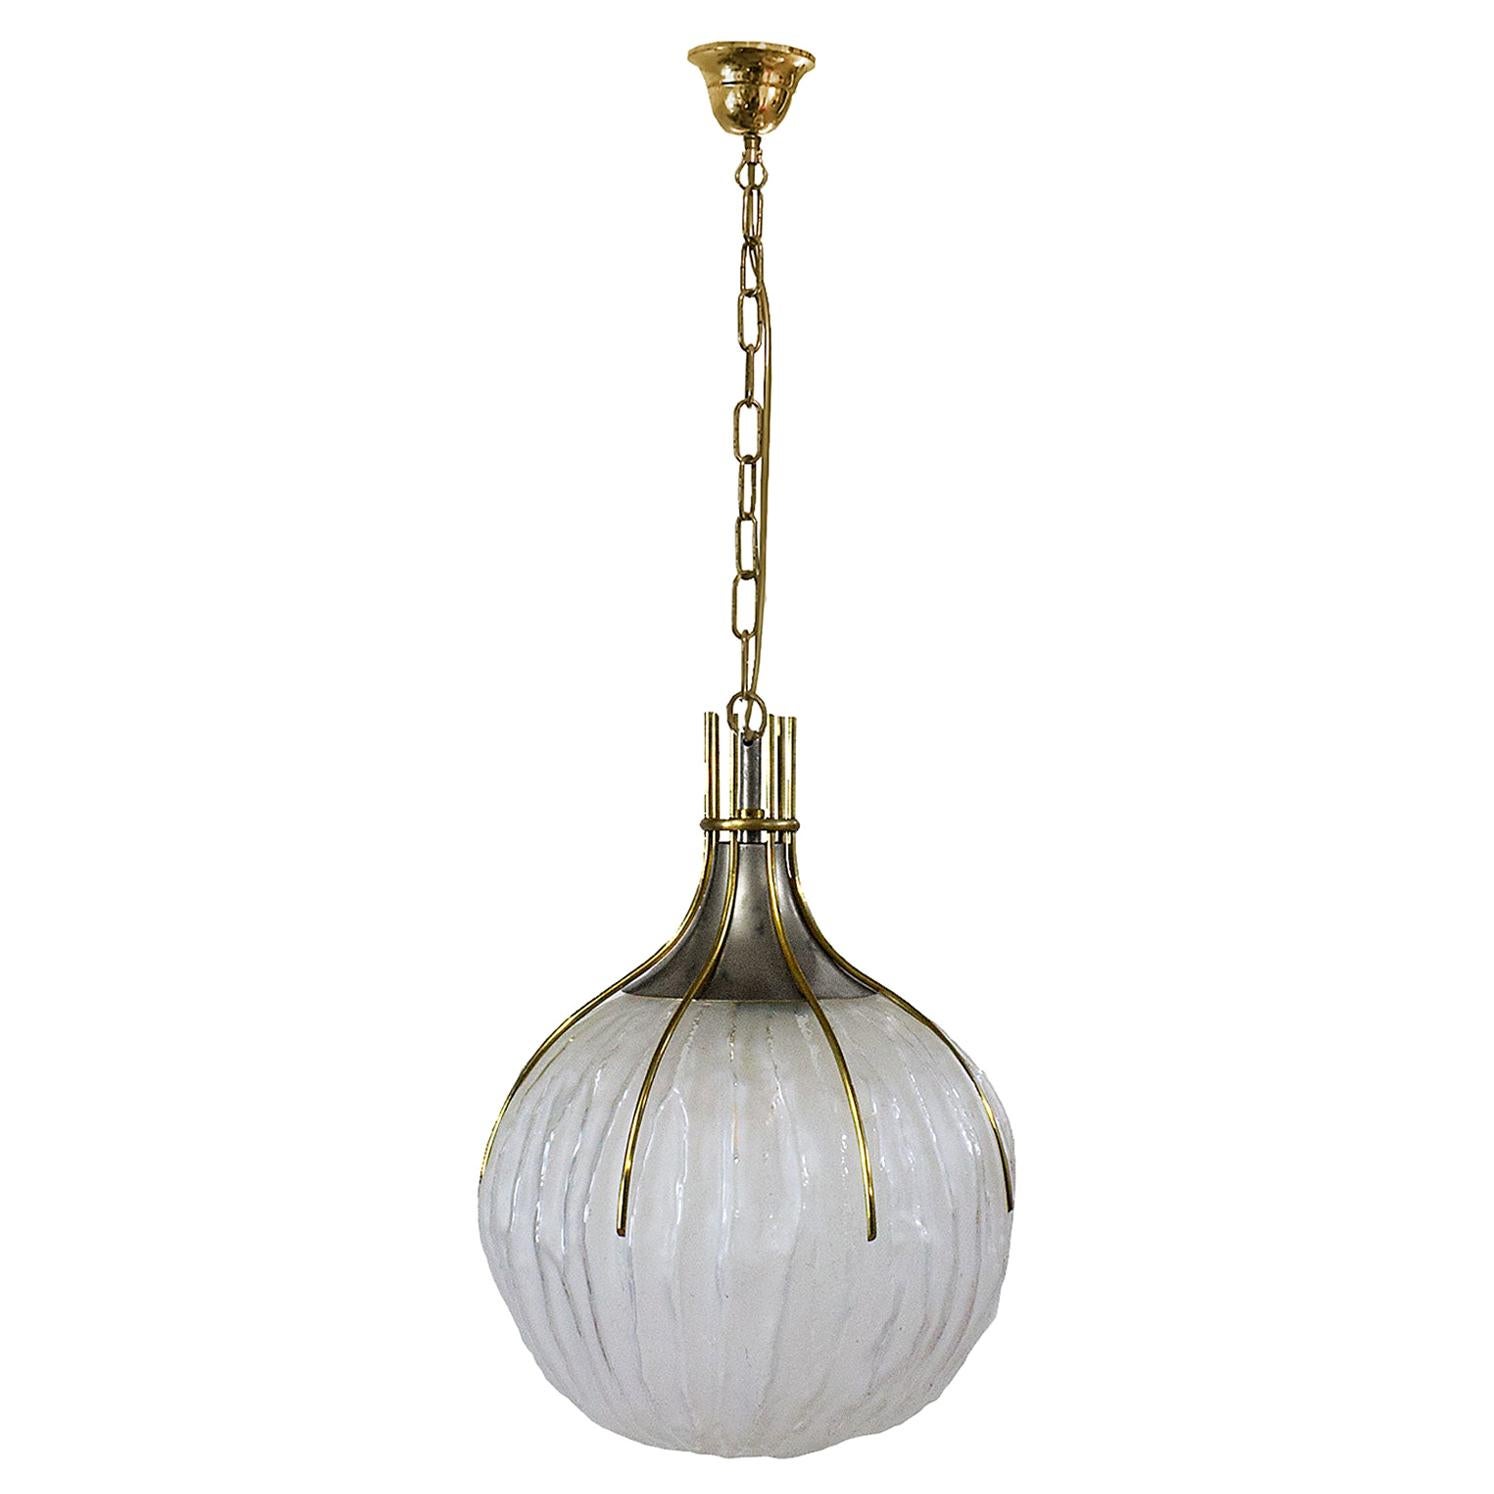 Mid-Century Modern Hanging Lantern by Esperia, Acid Etched Glass Ball - Italy